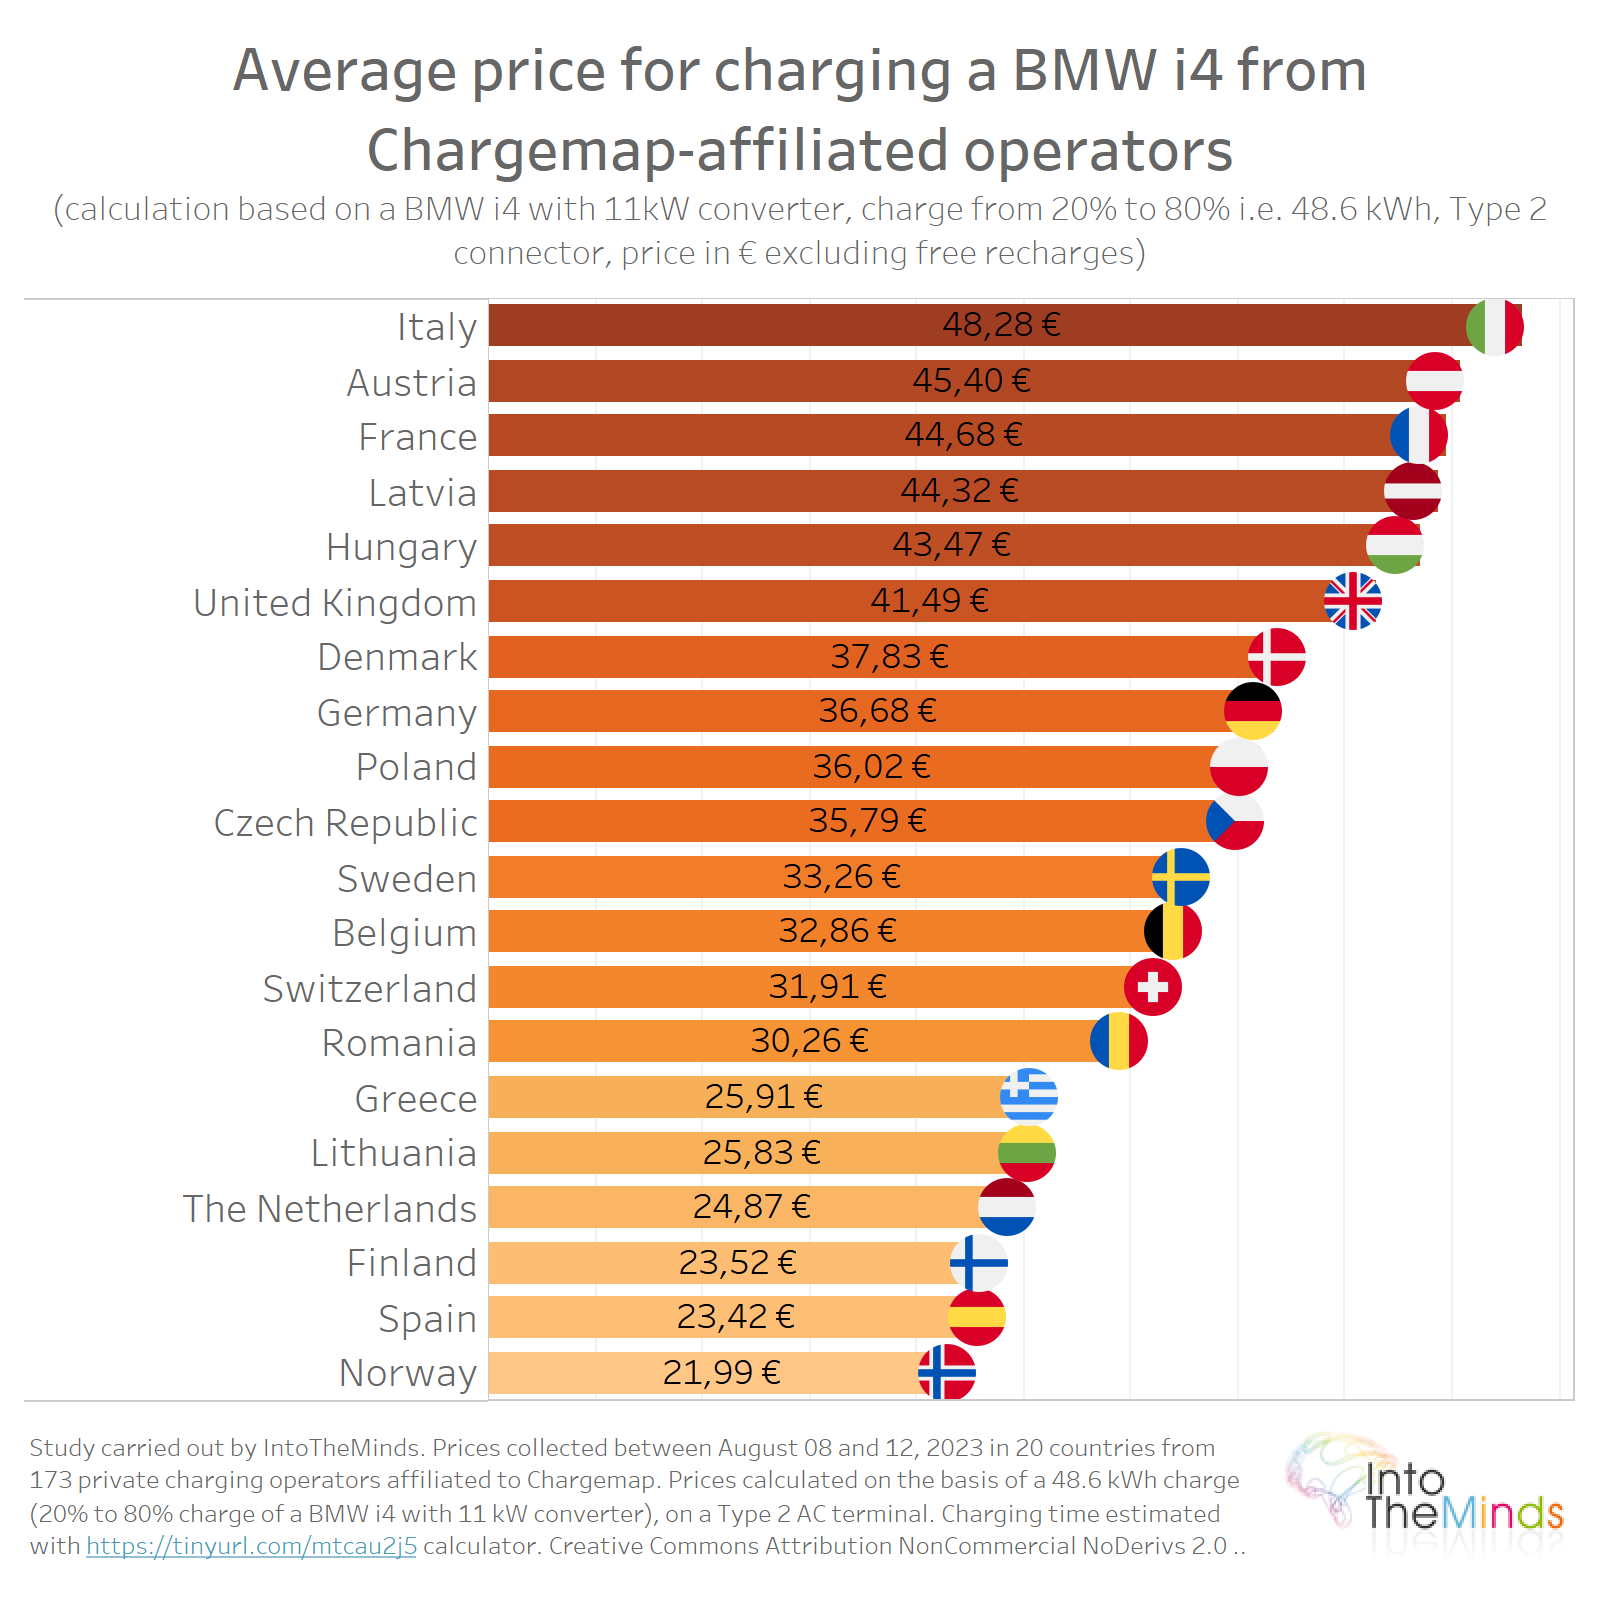 Average price for charging a BMW i4 from Chargemap-affiliated operators (calculation based on a BMW i4 with 11kW converter, charge from 20% to 80% i.e. 48.6 kWh, Type 2 connector, price in € excluding free recharges)